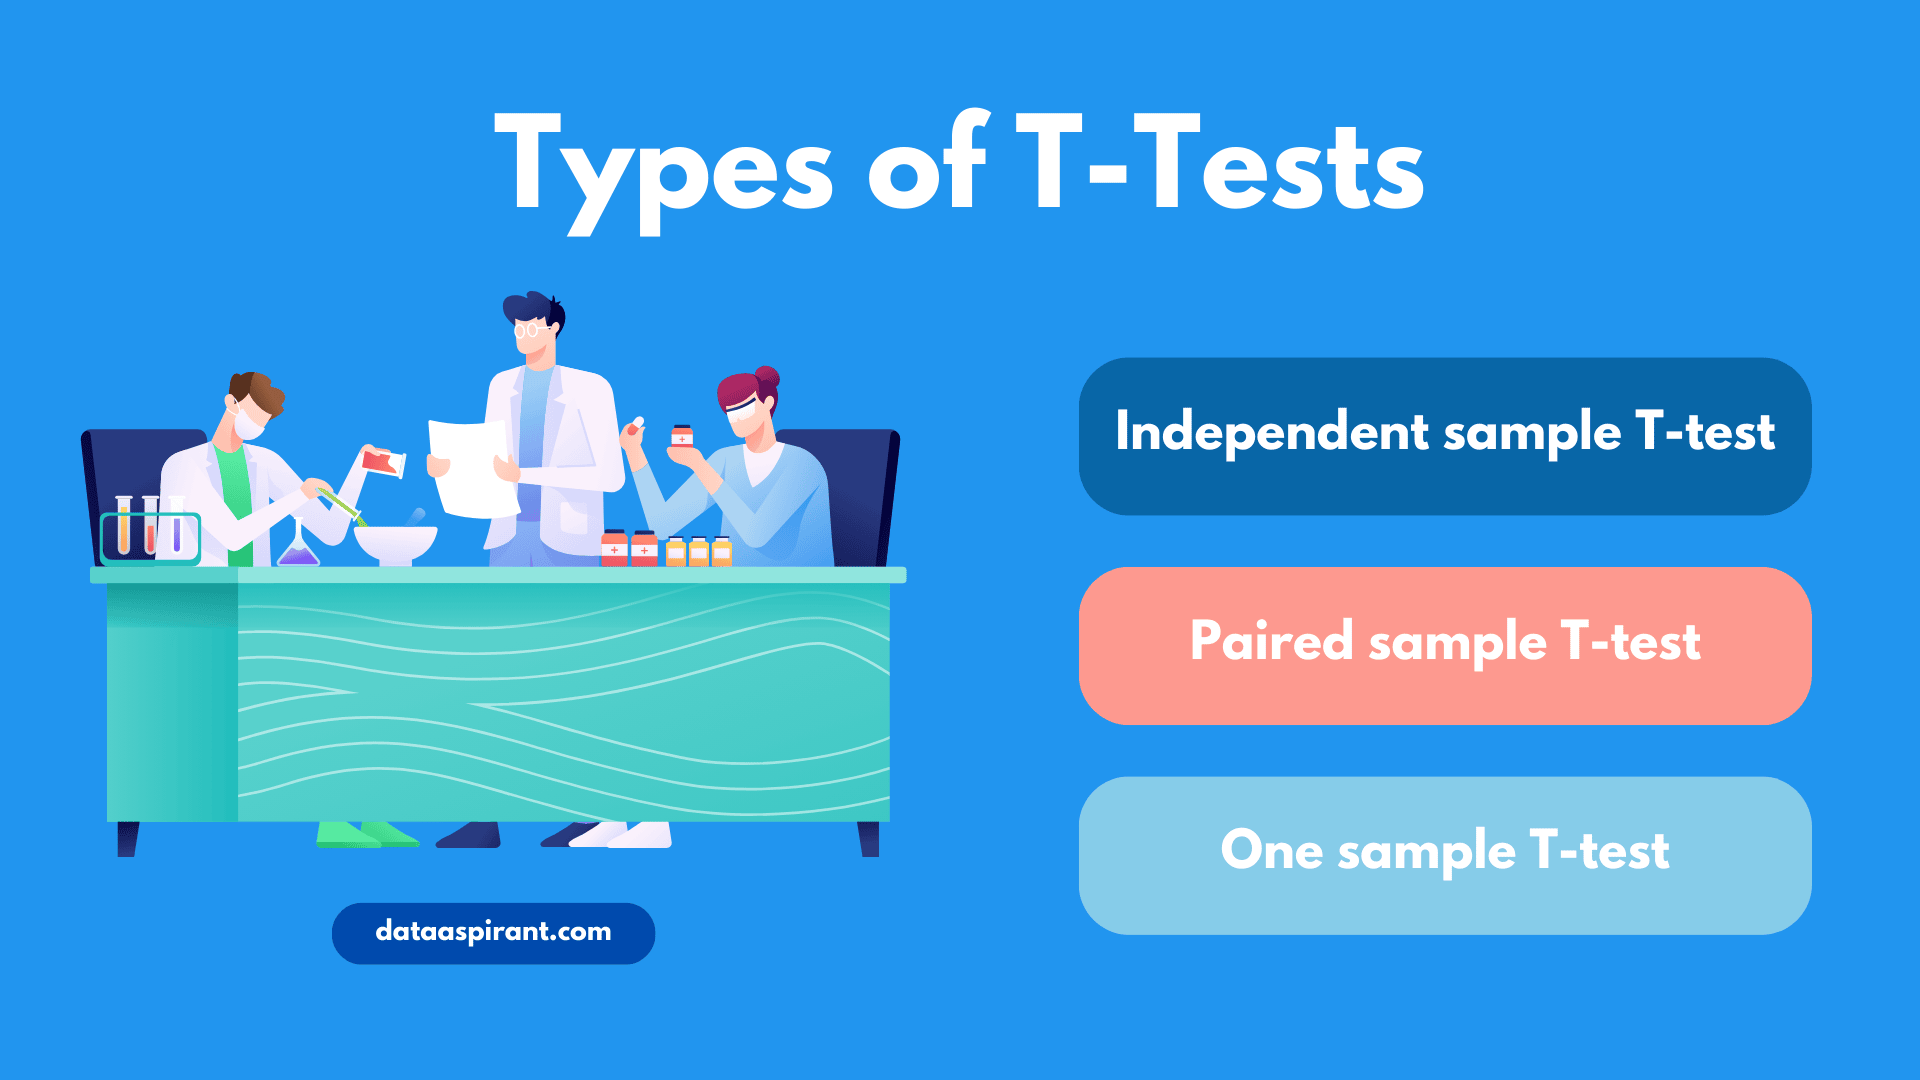 Types of T-Tests